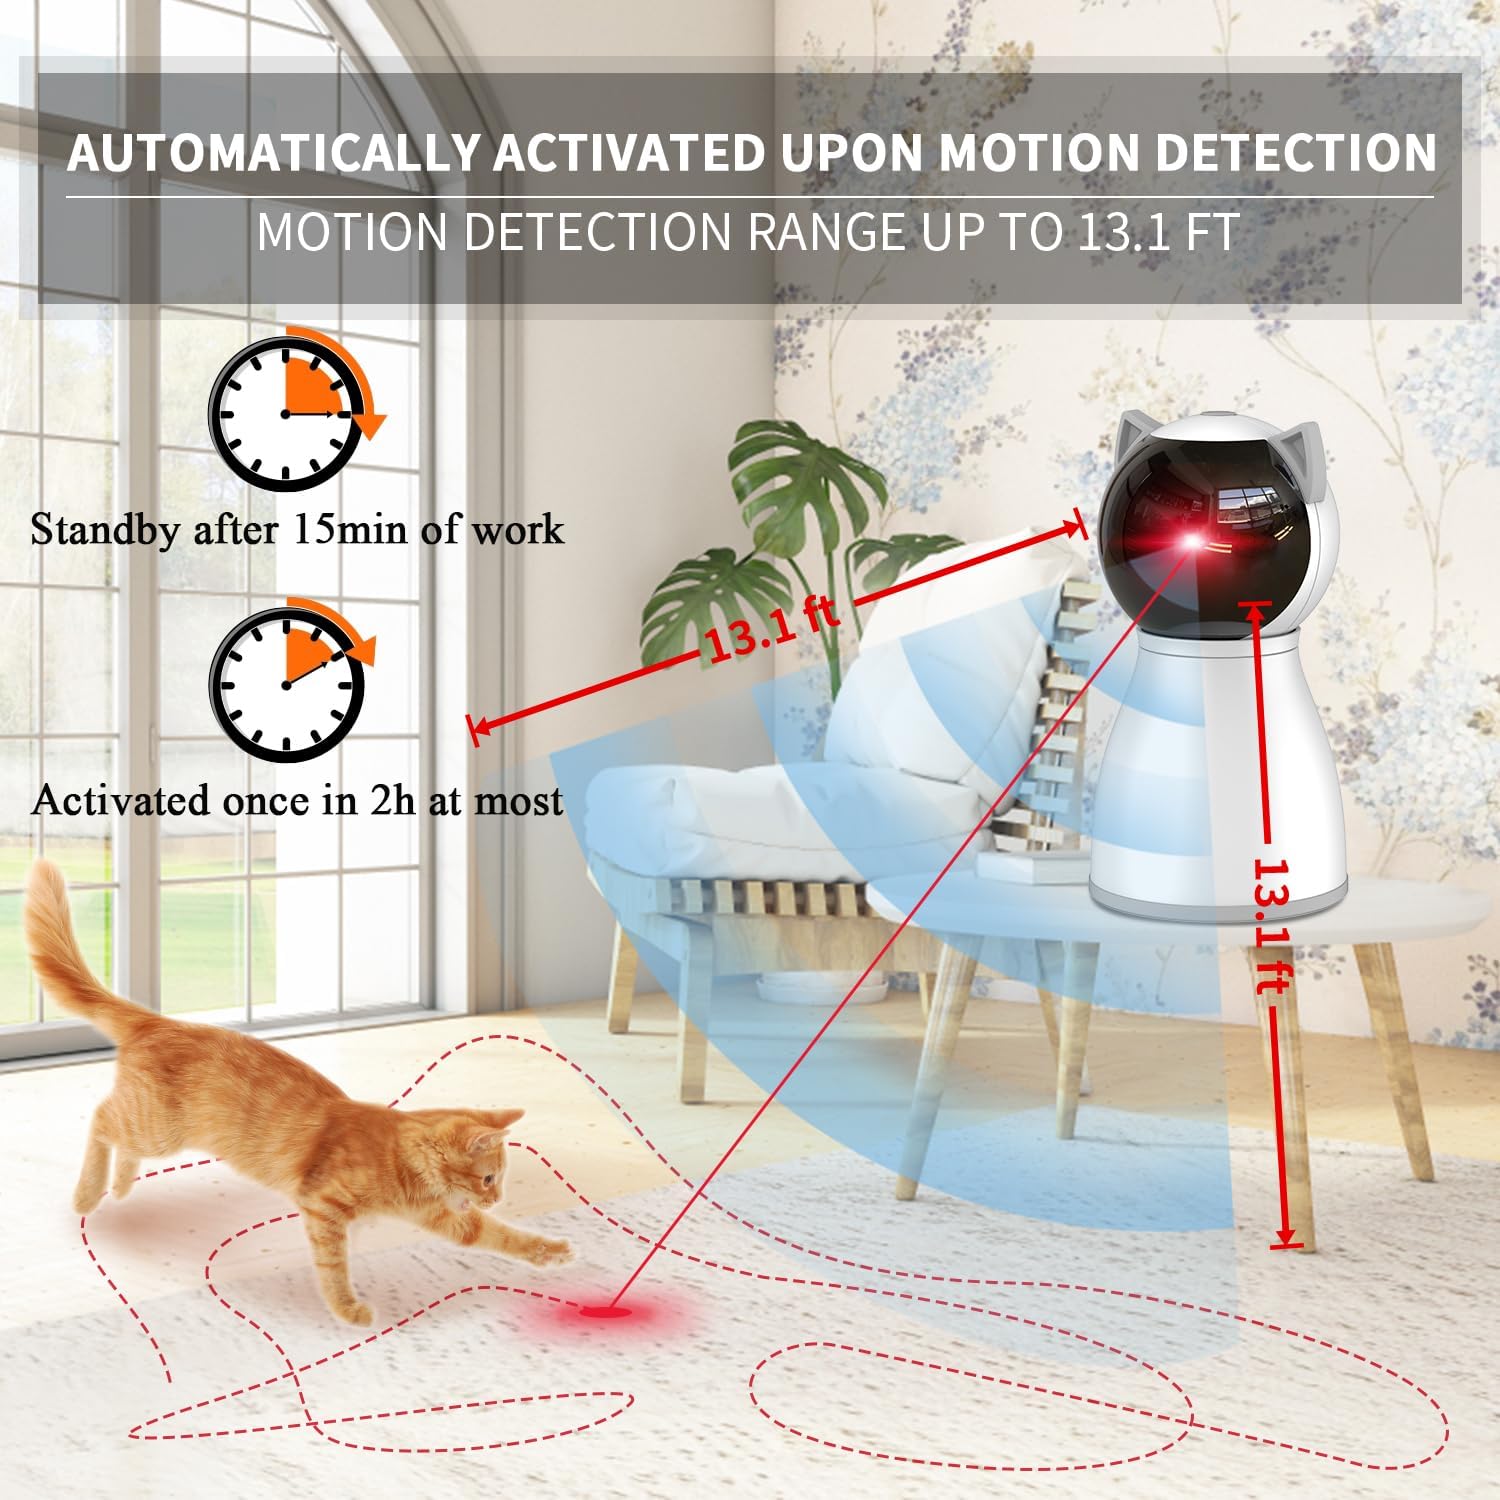 Cat Toys,The 4th Generation Real Random Trajectory,Motion Activated Rechargeable Automatic Cat Laser Toy,Interactive Cat Toys Cykapu